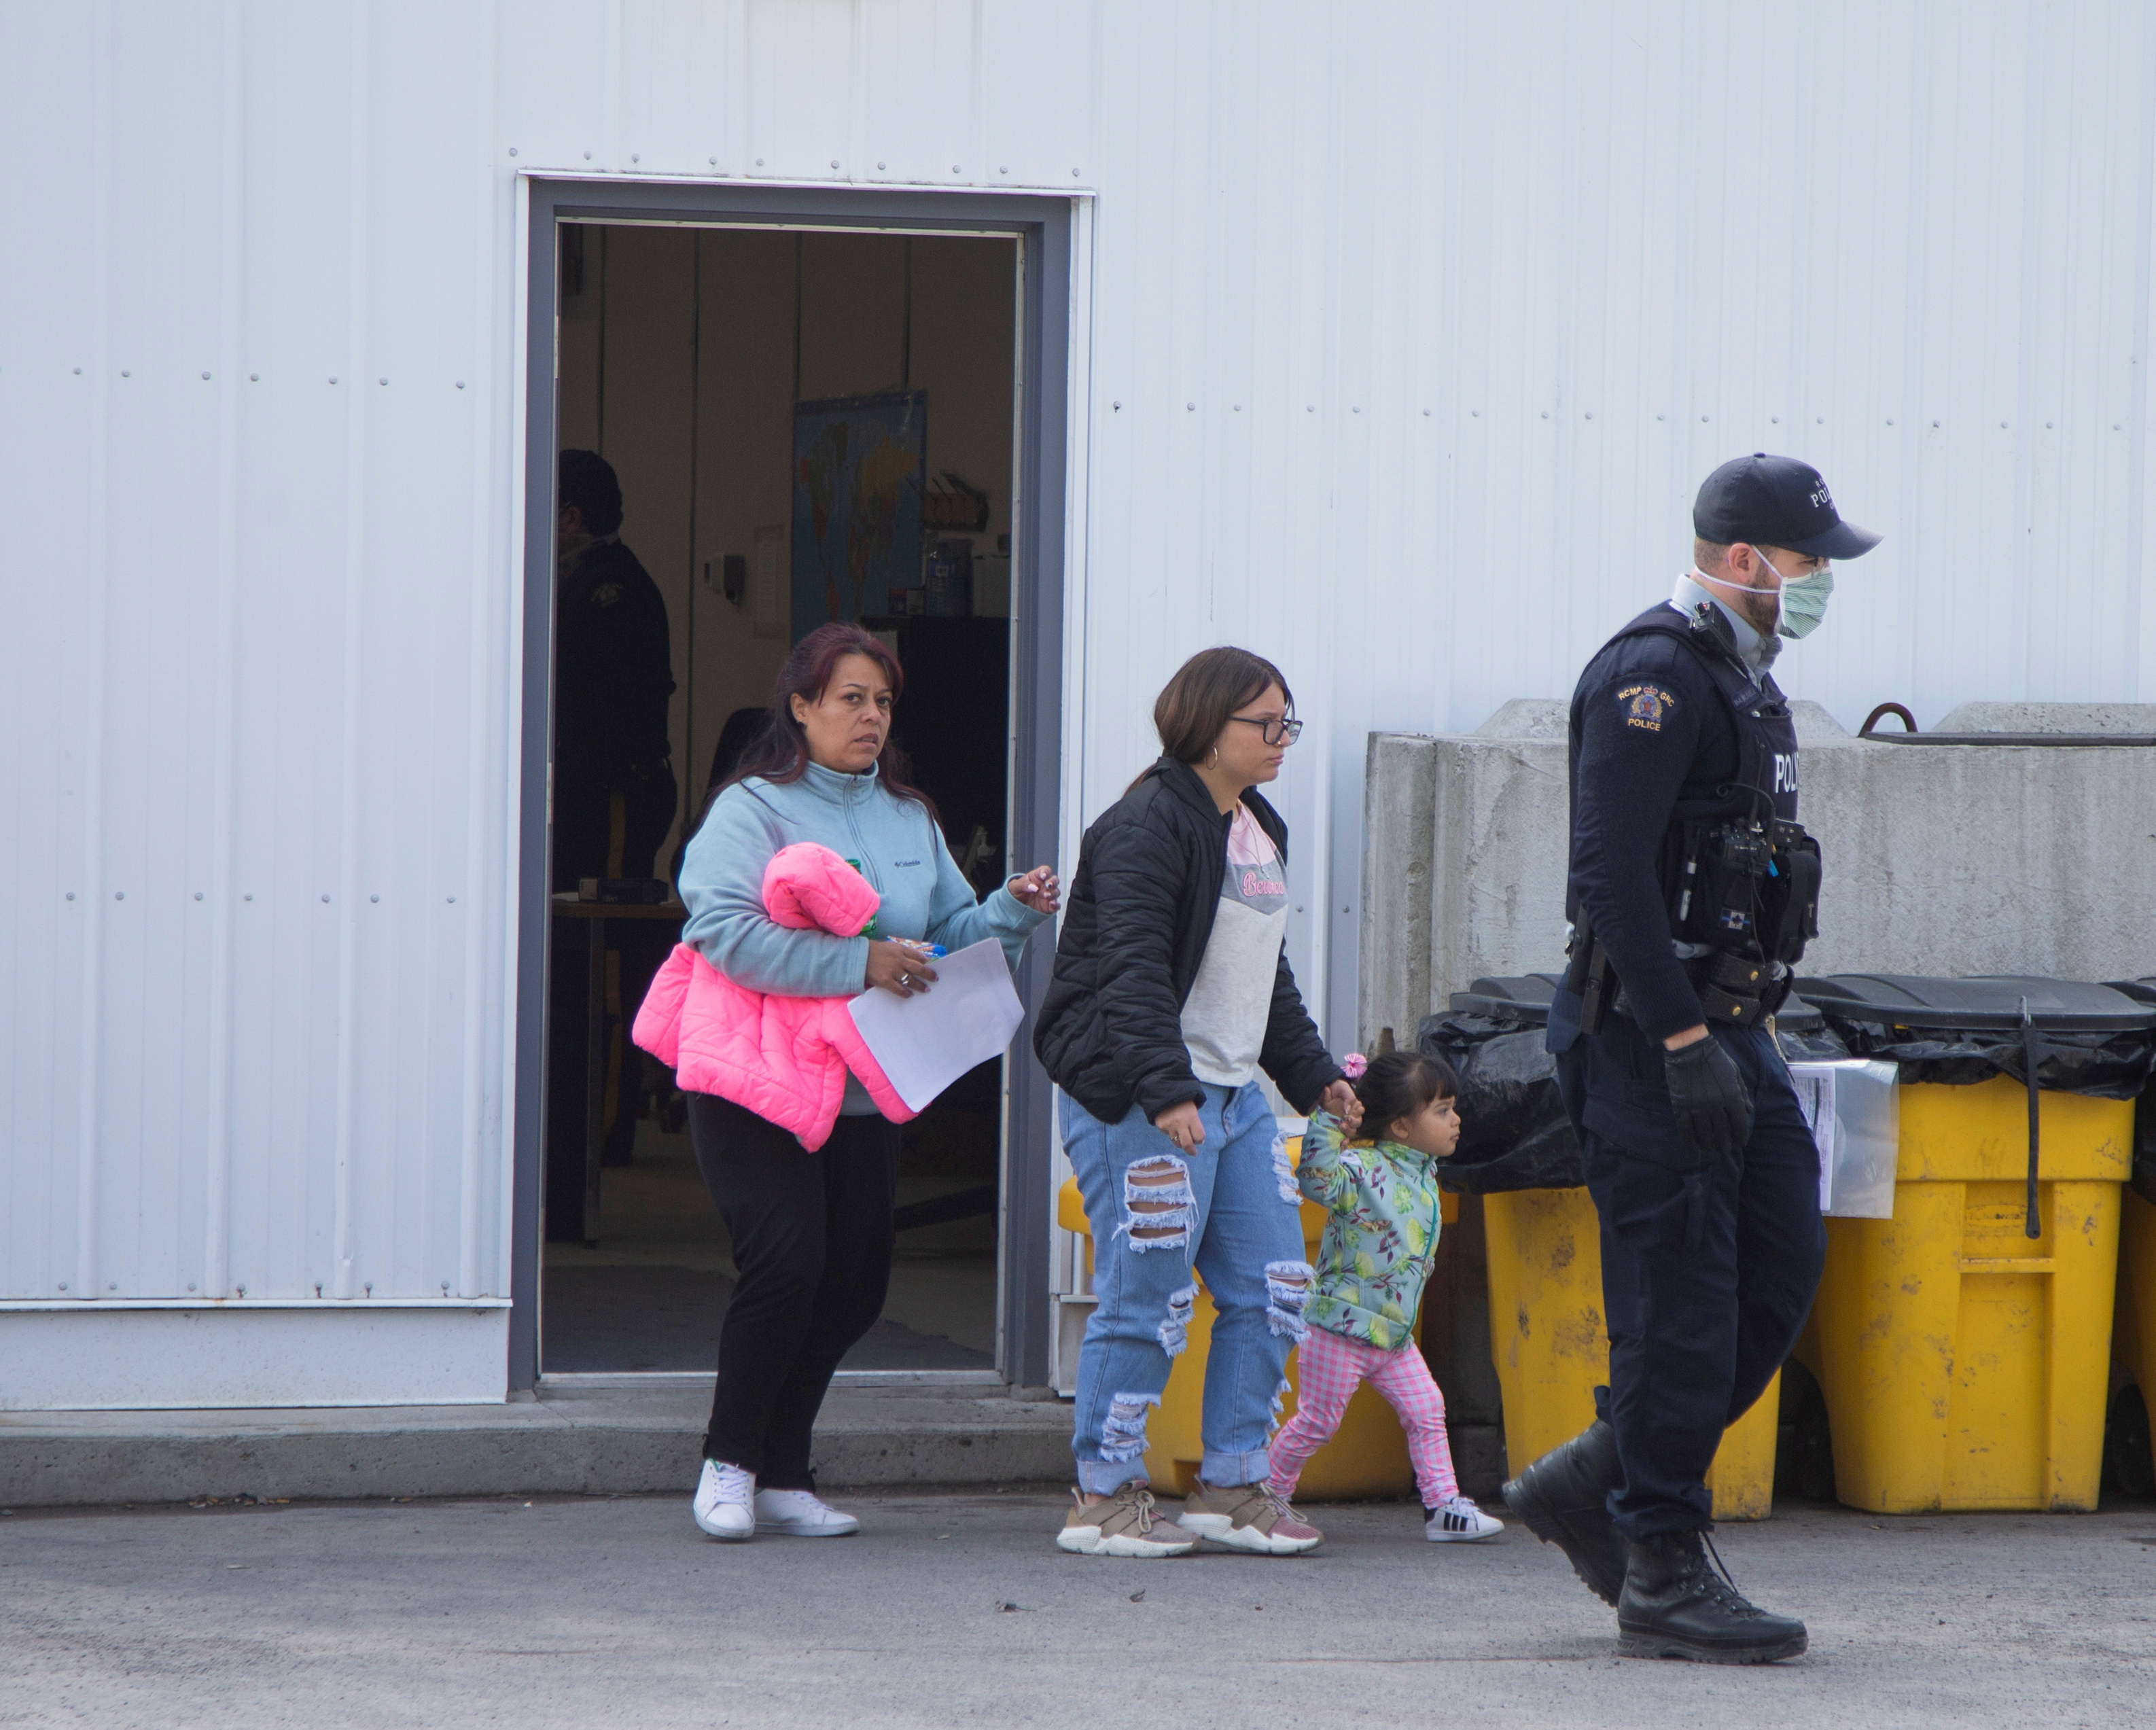 Asylum seekers follow a Royal Canadian Mounted Police (RCMP) officer after being processed for crossing the border from New York into Canada at, Roxham Road, in Hemmingford, Quebec, Canada March 19, 2020.  REUTERS/Christinne Muschi/File Photo